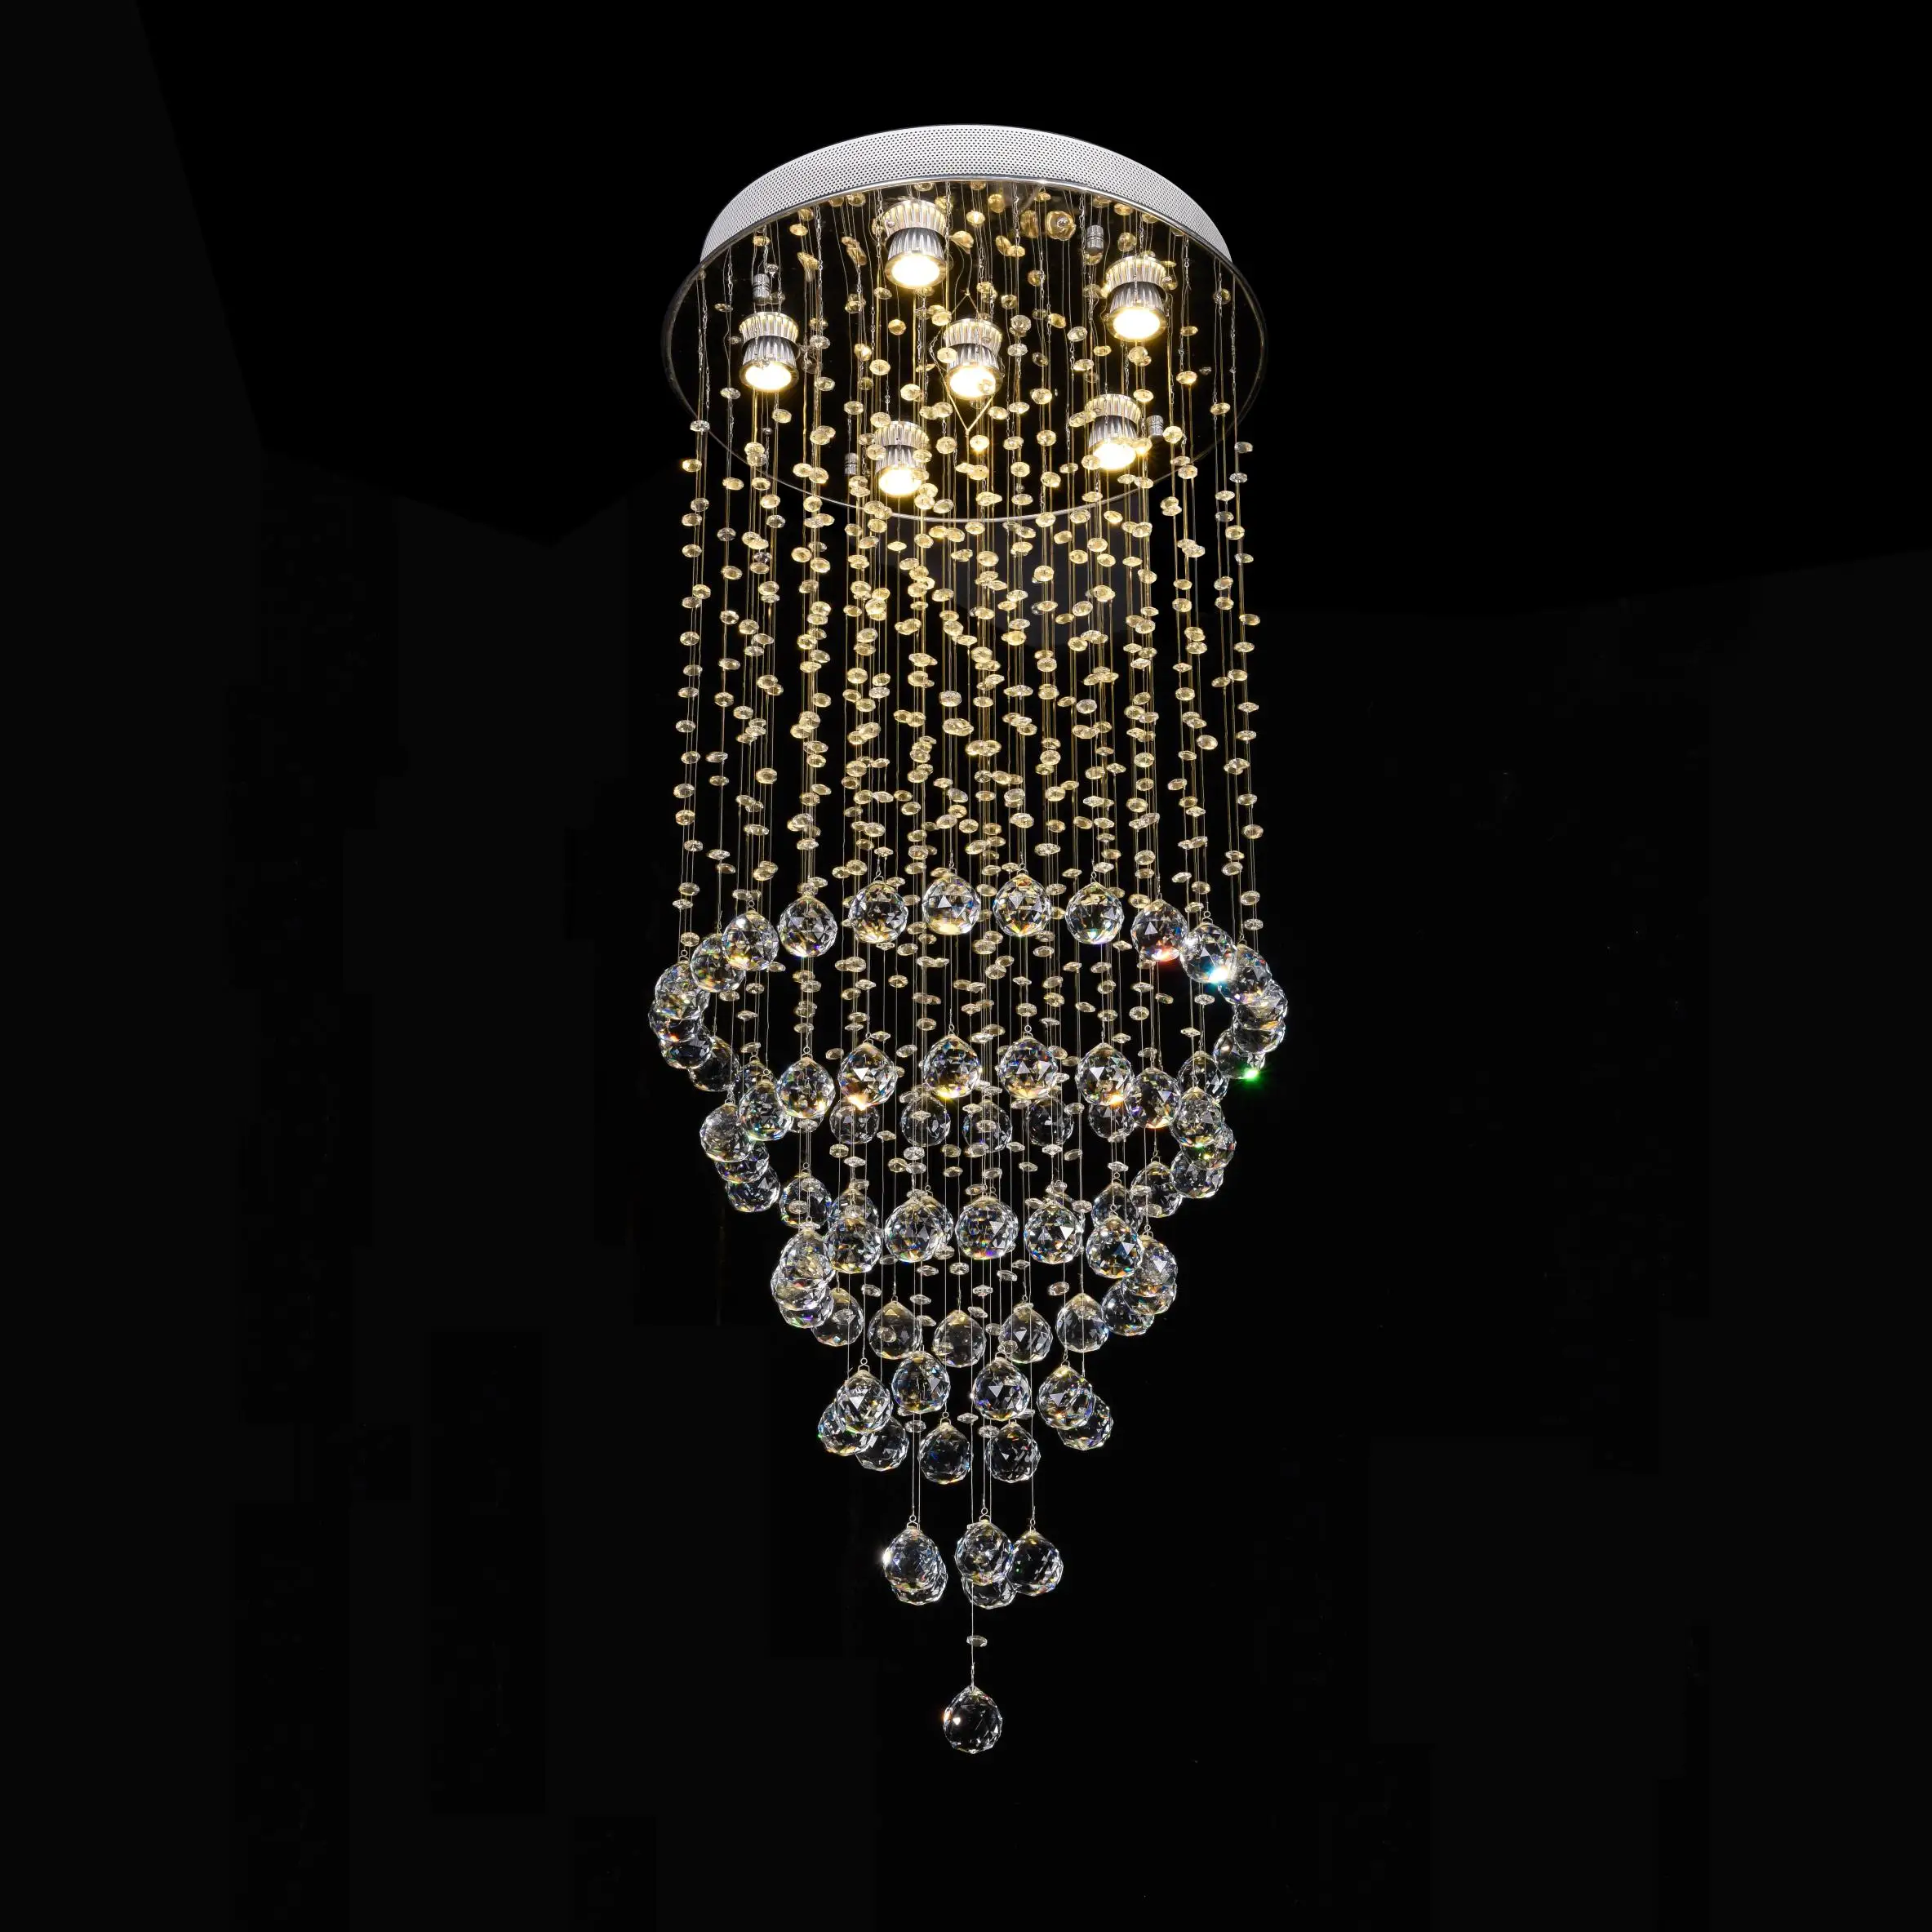 commercial modern lobby water drop high ceiling pendant lamp light chandelier